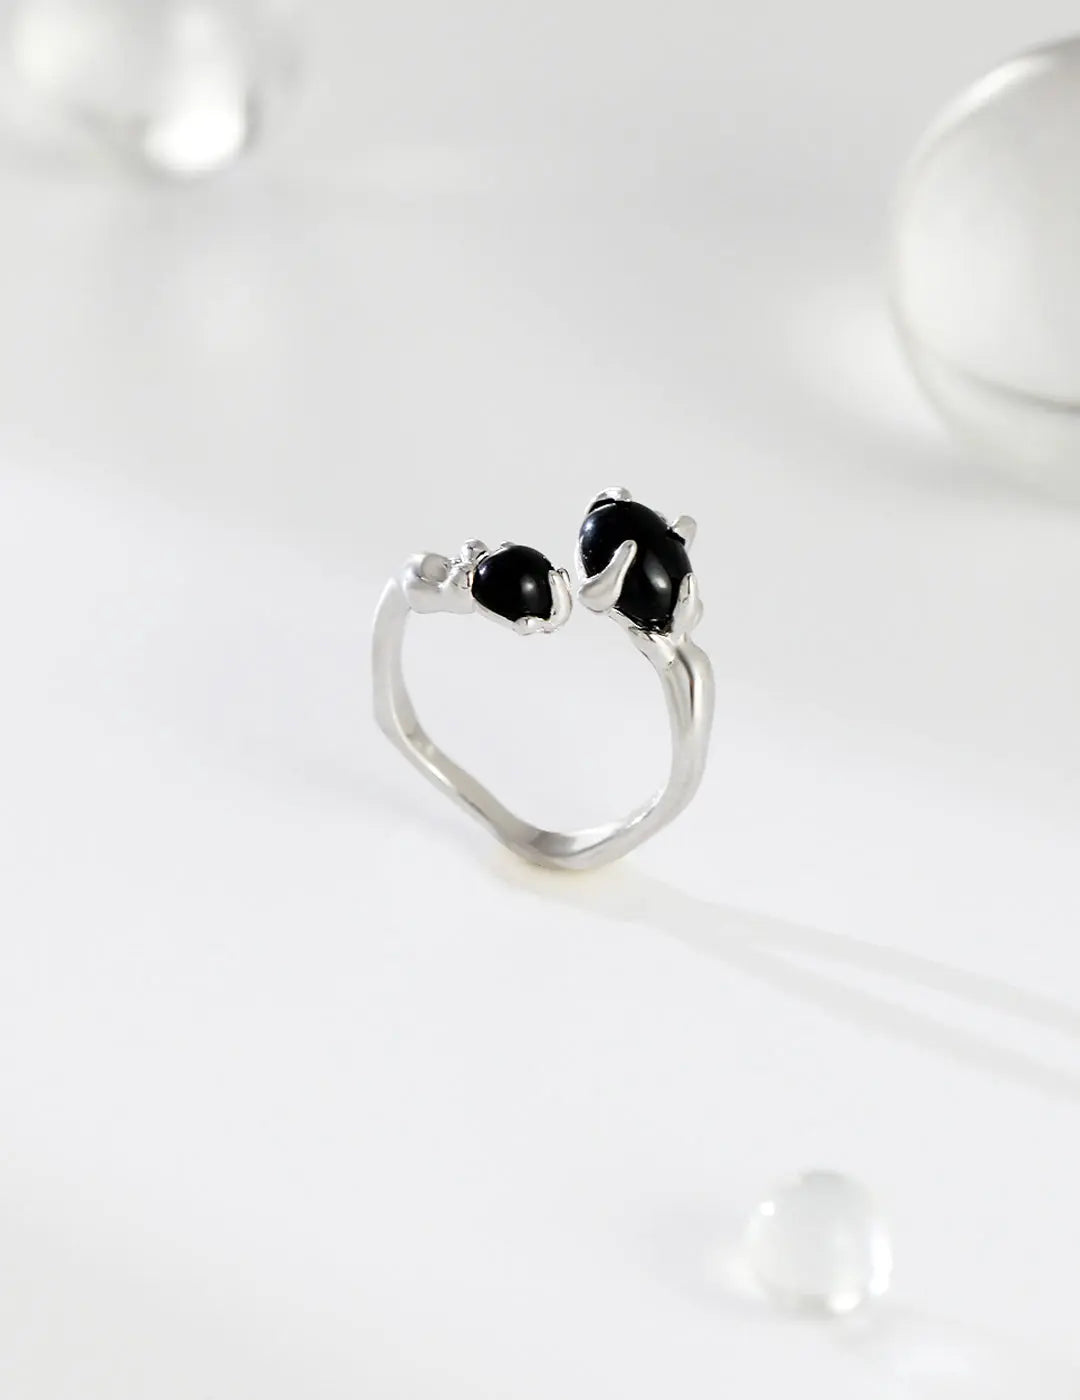 S925 silver open end ring with two agate stone